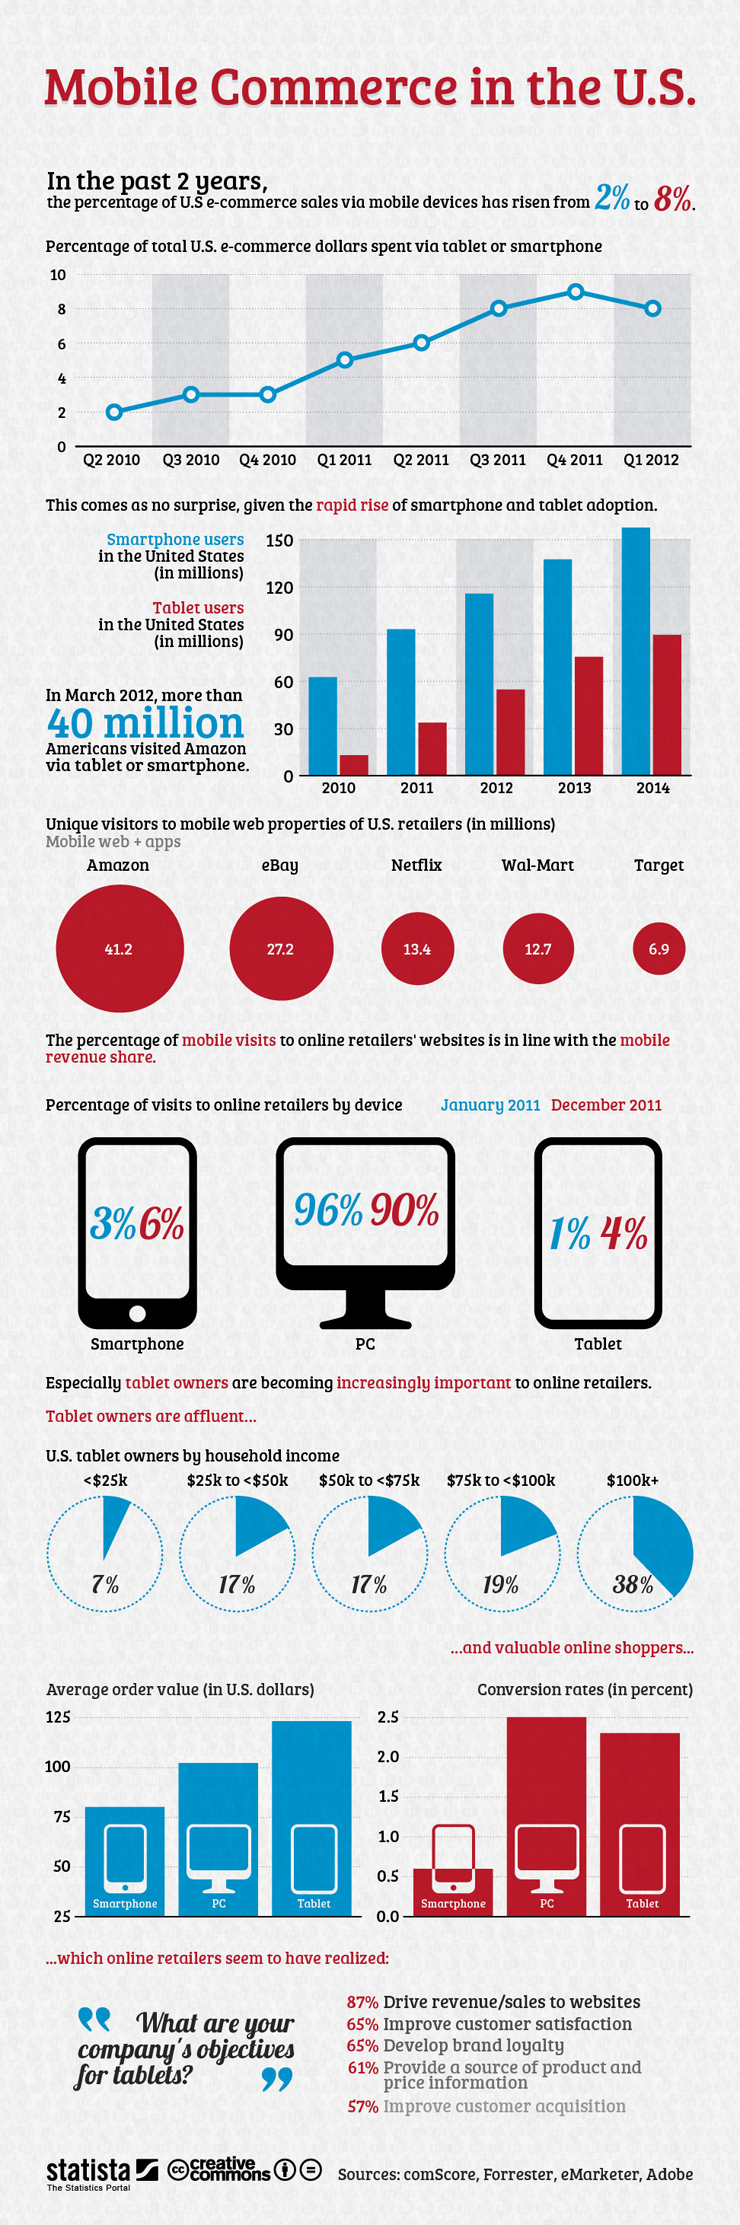 Mobile Commerce in the U.S.